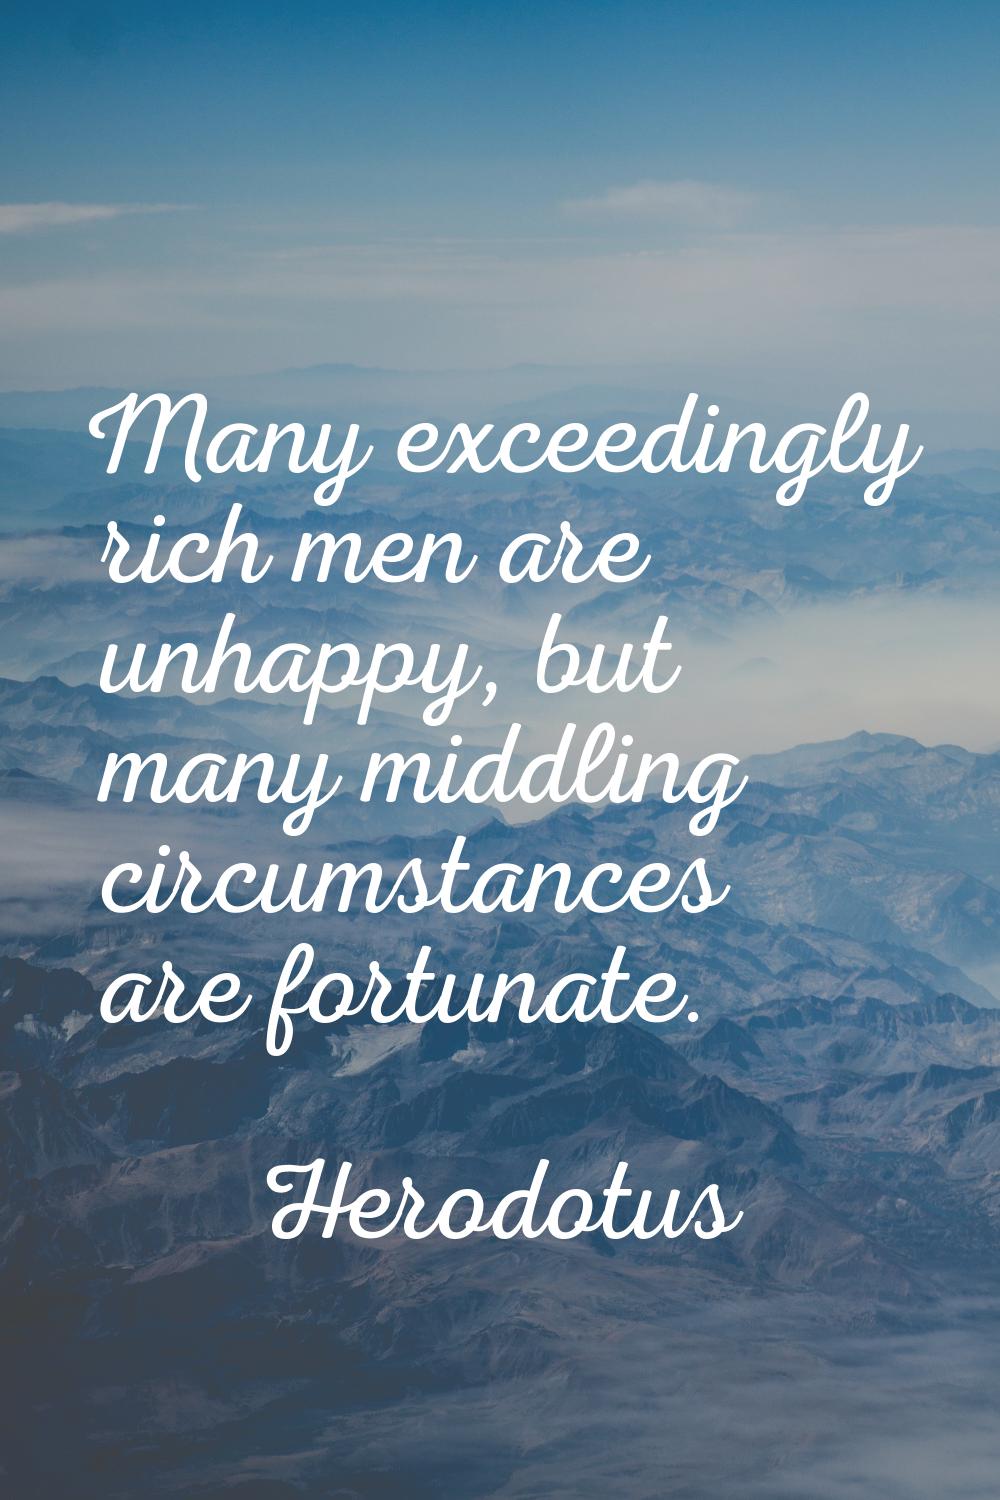 Many exceedingly rich men are unhappy, but many middling circumstances are fortunate.